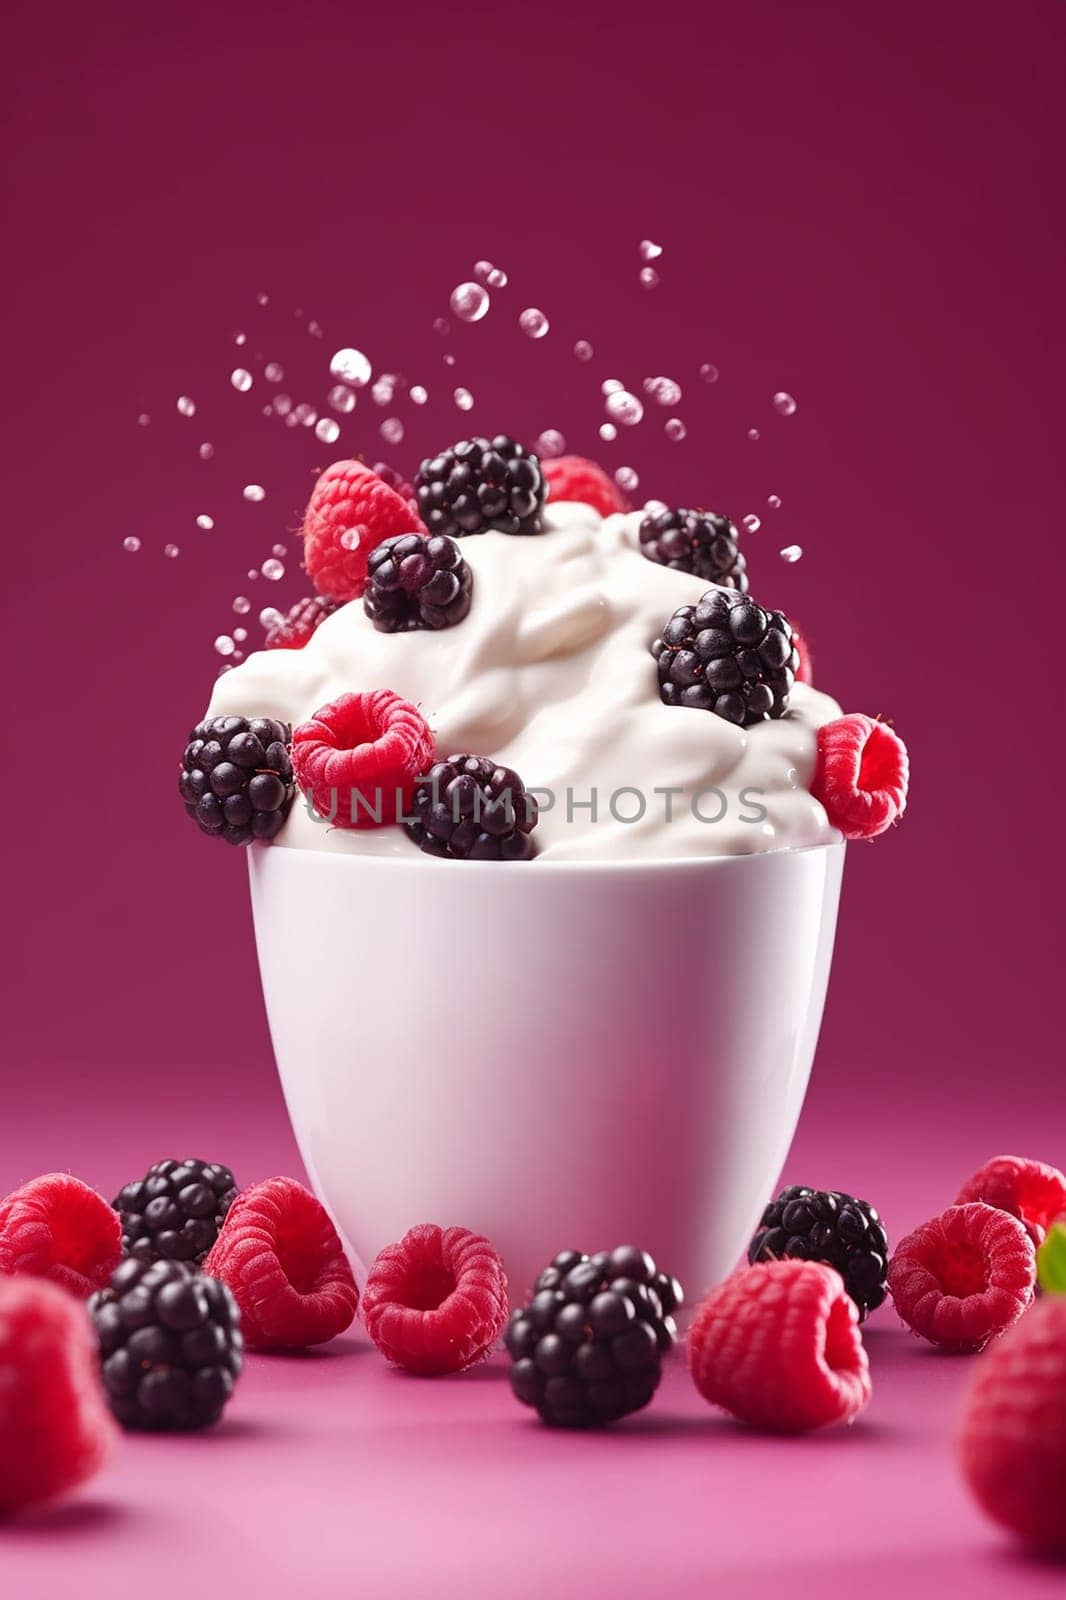 A bowl of ice cream with fresh raspberries and blueberries on top.